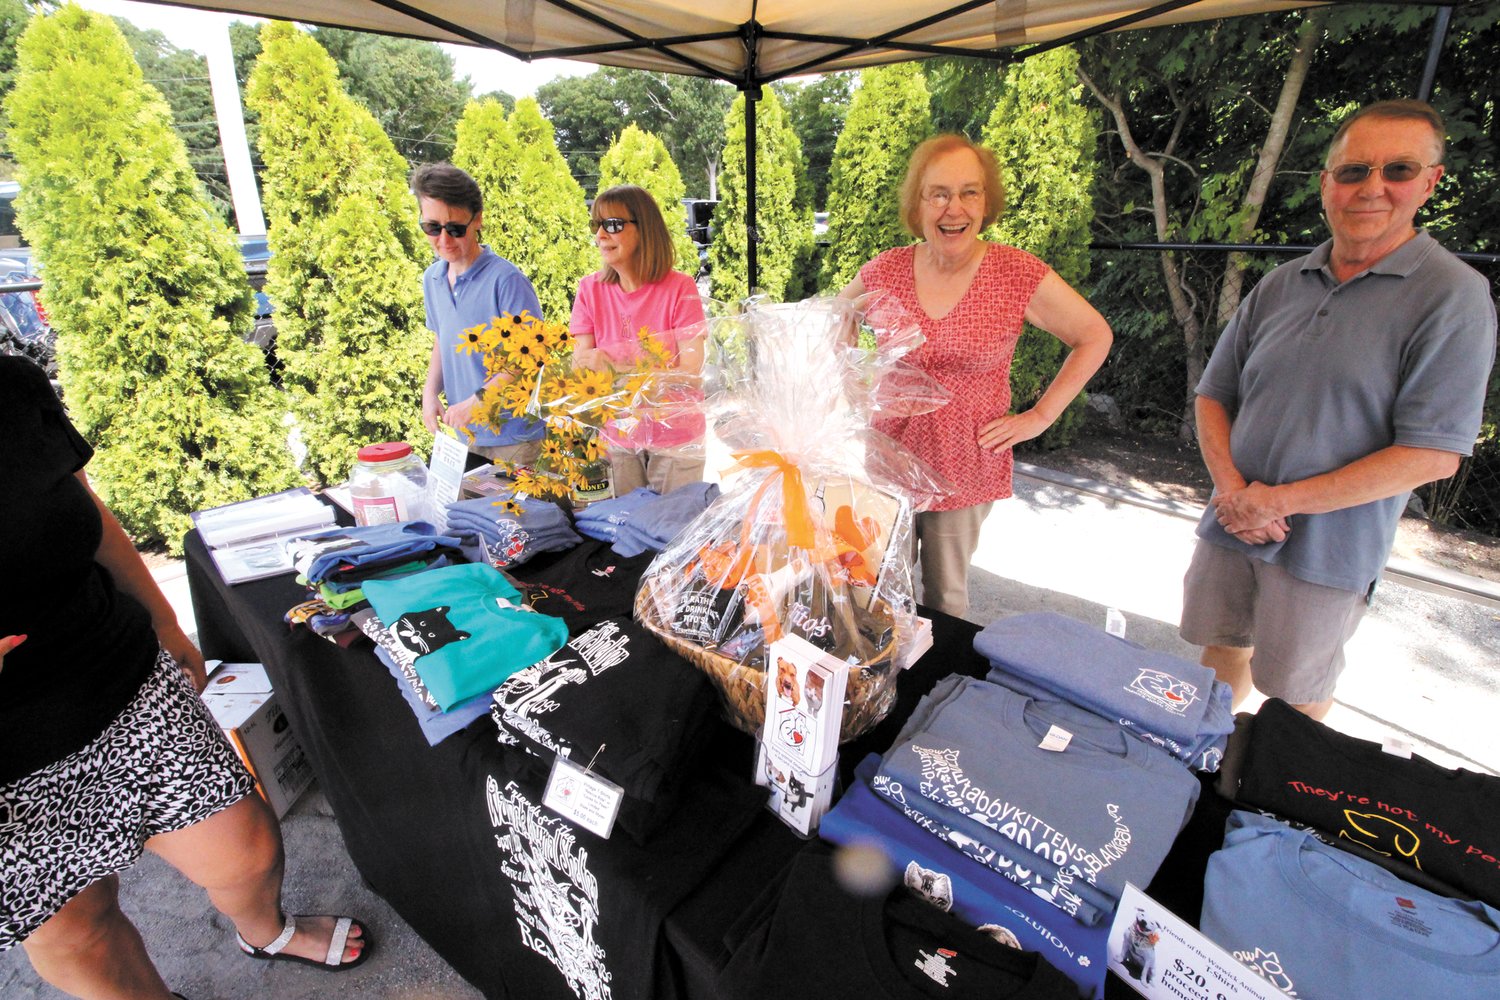 LOTS TO PICK FROM: In a the shade of a tent, Friends of the Warwick Animal Shelter signed up volunteers, sold items to benefit the organization and collected raffle tickets.